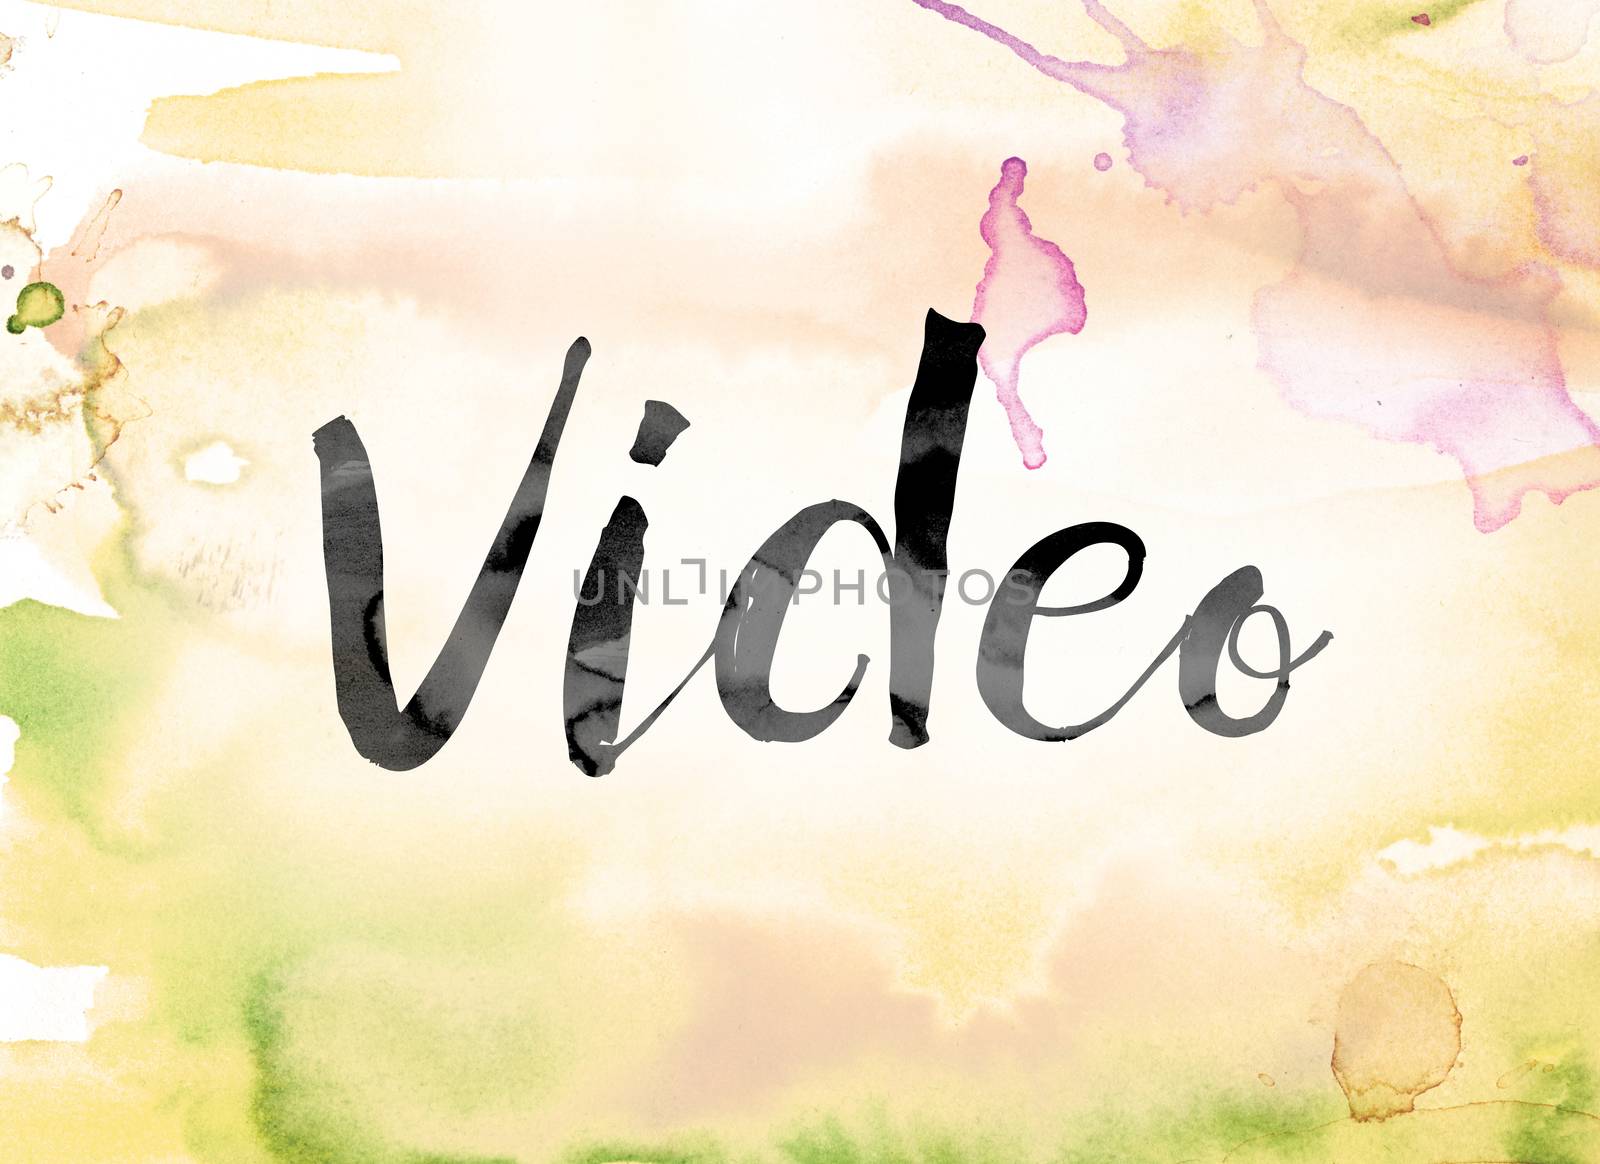 The word "Video" painted in black ink over a colorful watercolor washed background concept and theme.